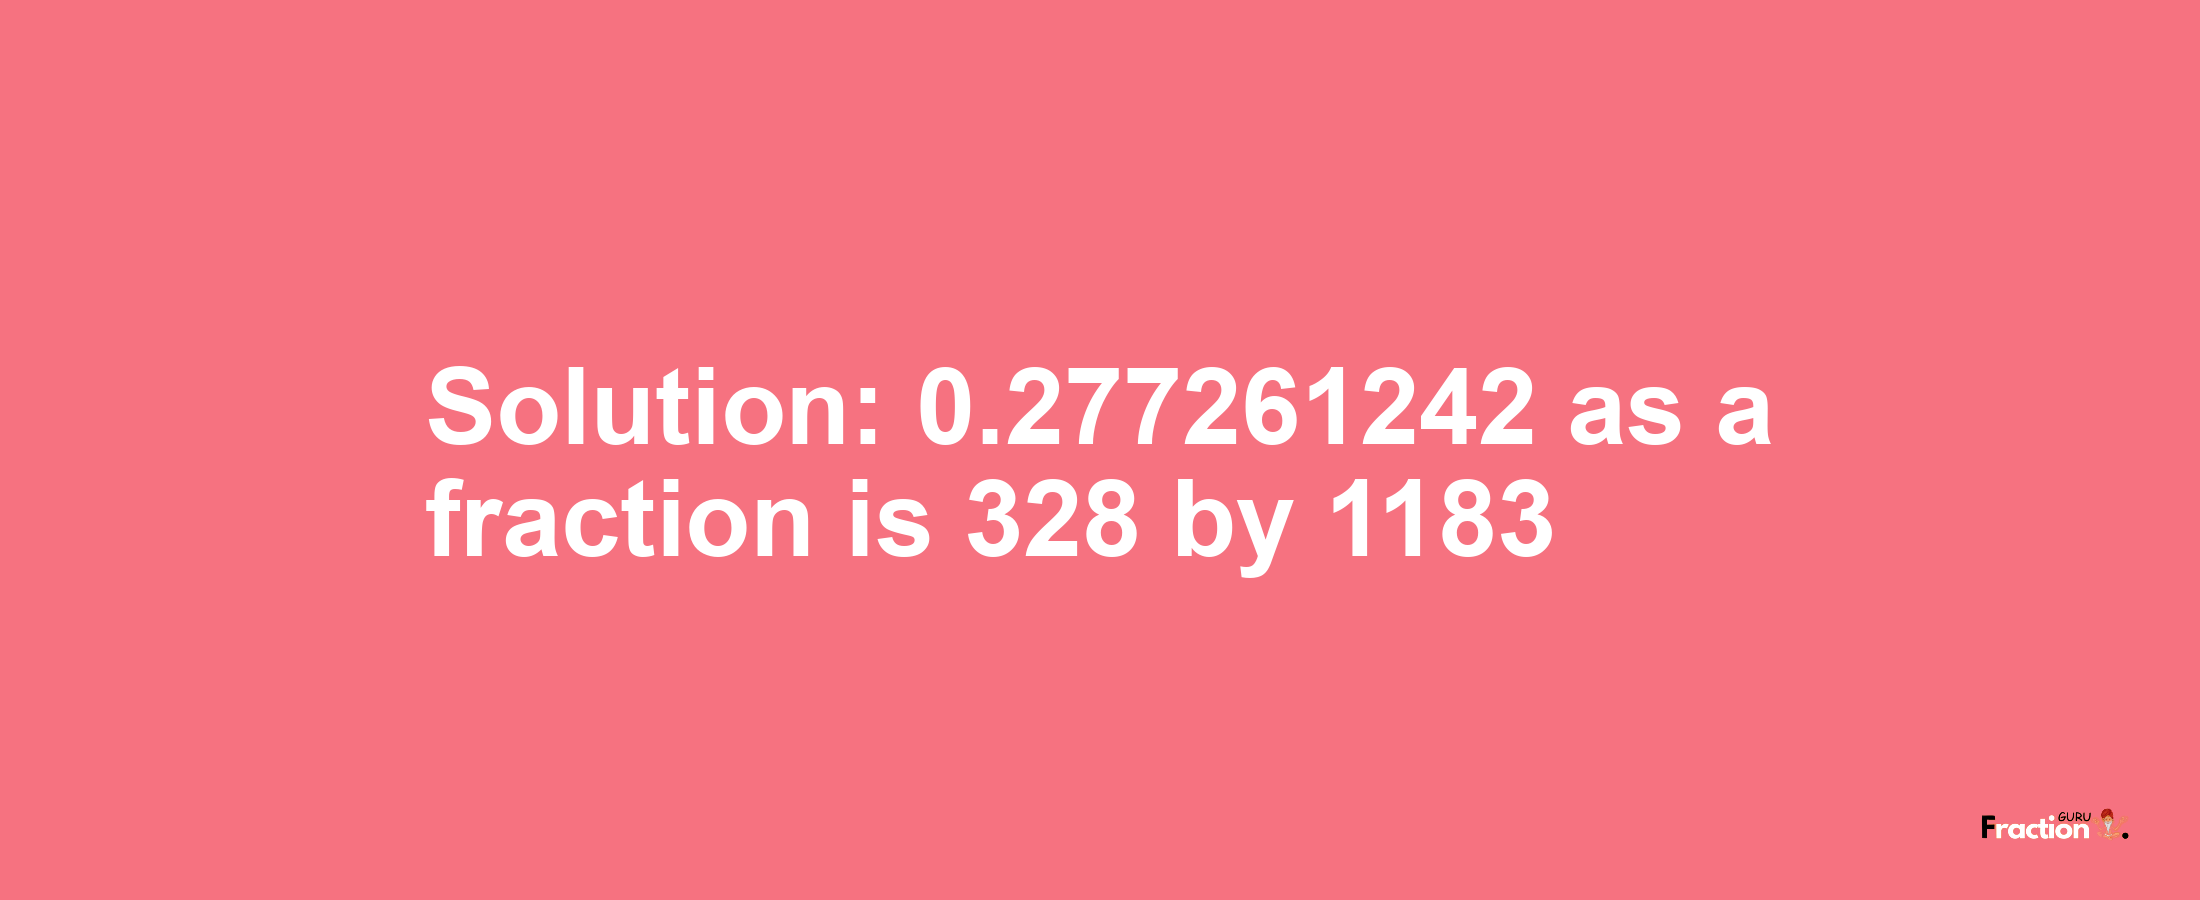 Solution:0.277261242 as a fraction is 328/1183